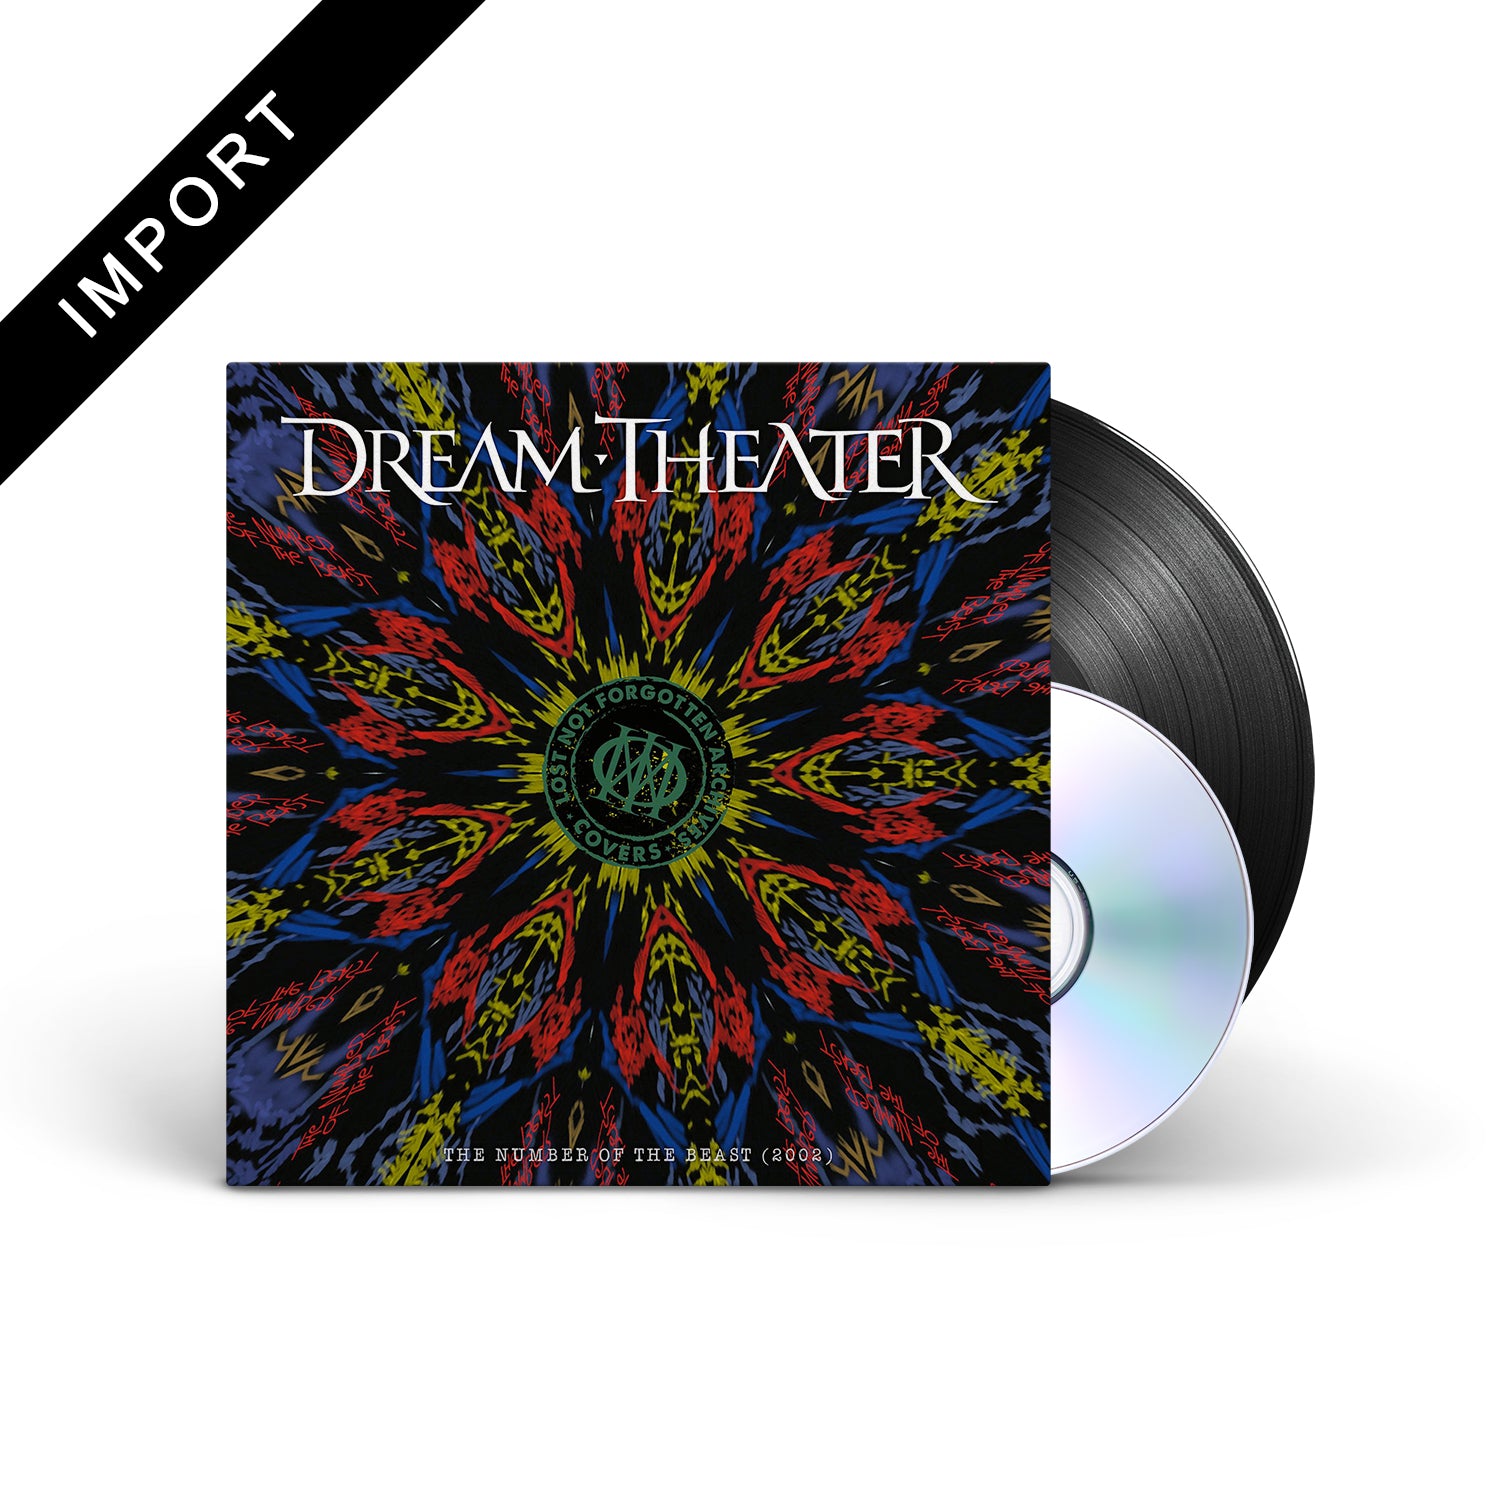 DREAM THEATER - Lost Not Forgotten Archives: The Number of the Beast (2002) - LP + CD